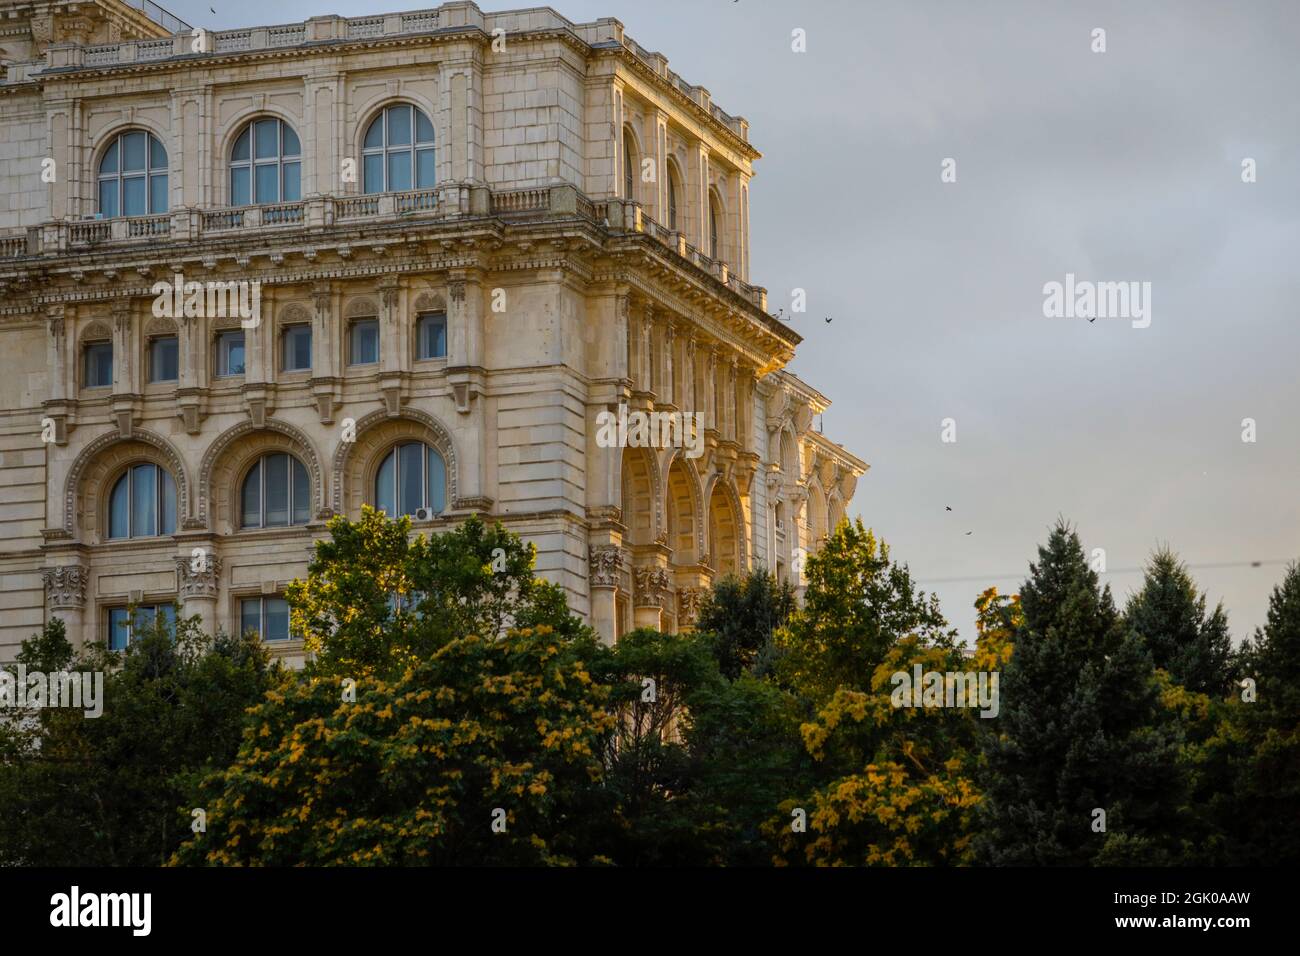 Bucharest, Romania - September 2, 2021: The Palace of Parliament building in Bucharest at sunset. Stock Photo